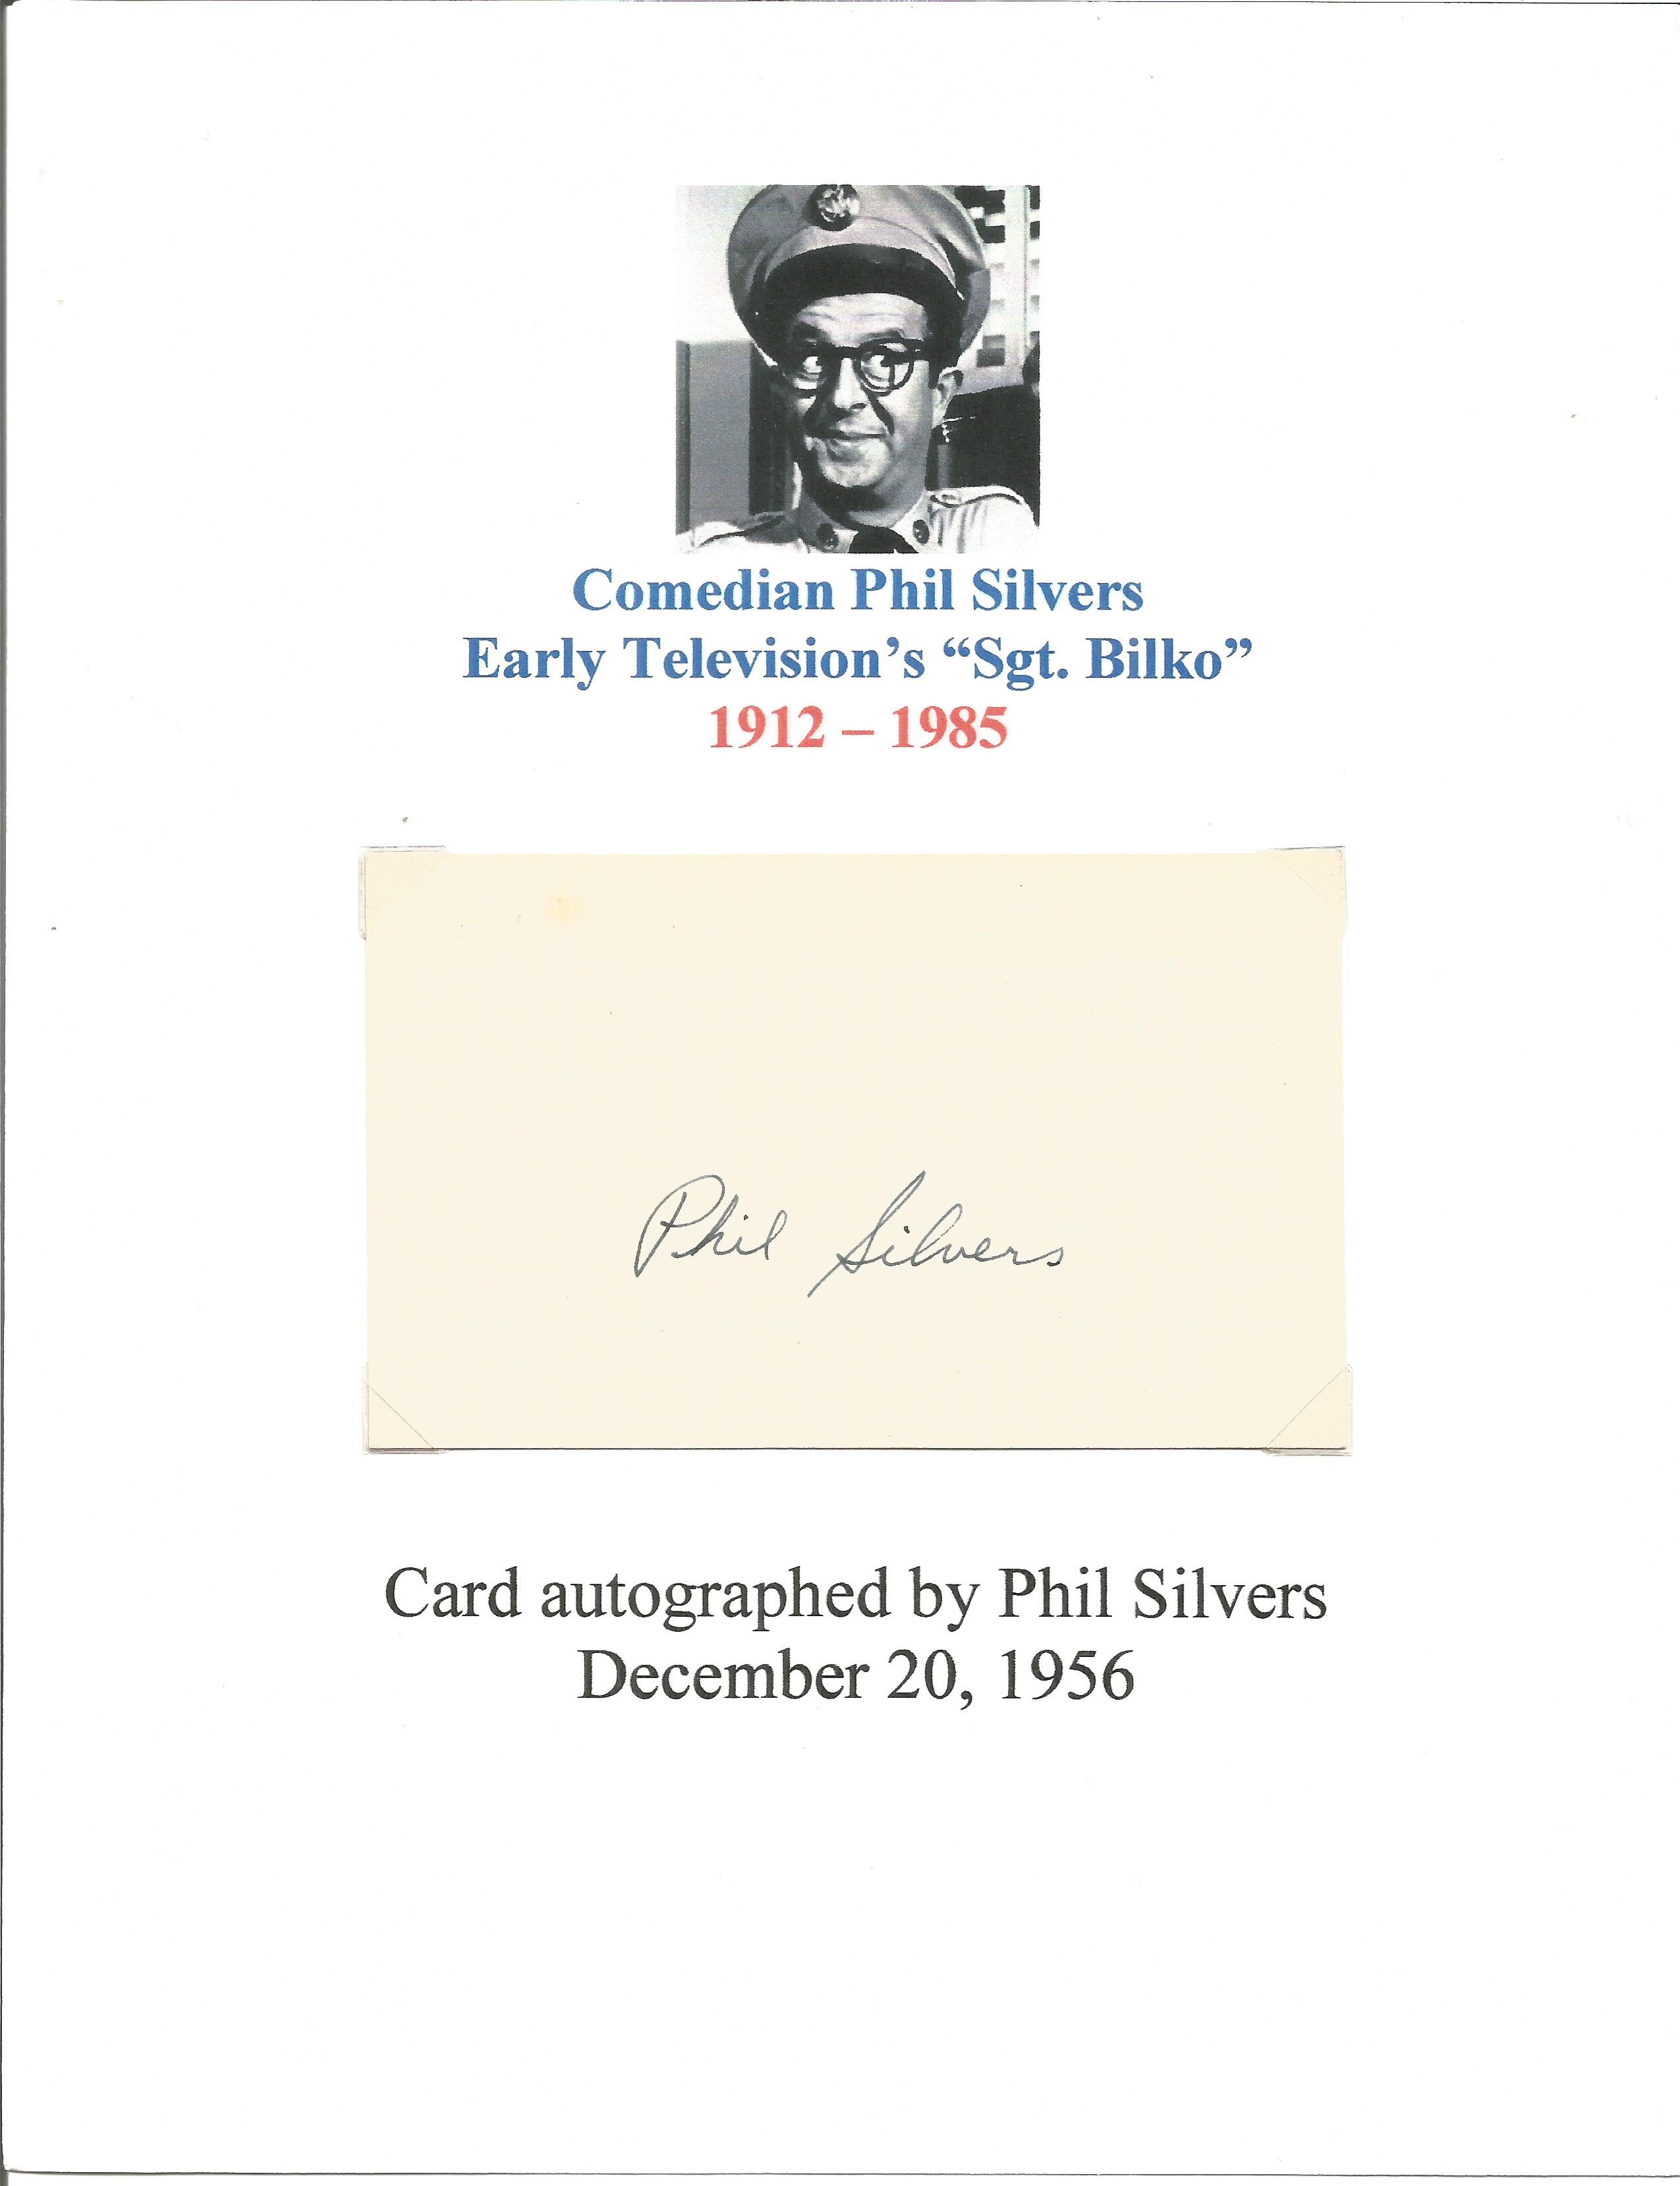 Phil Silvers signed card. (May 11, 1911 - November 1, 1985) was an American entertainer and